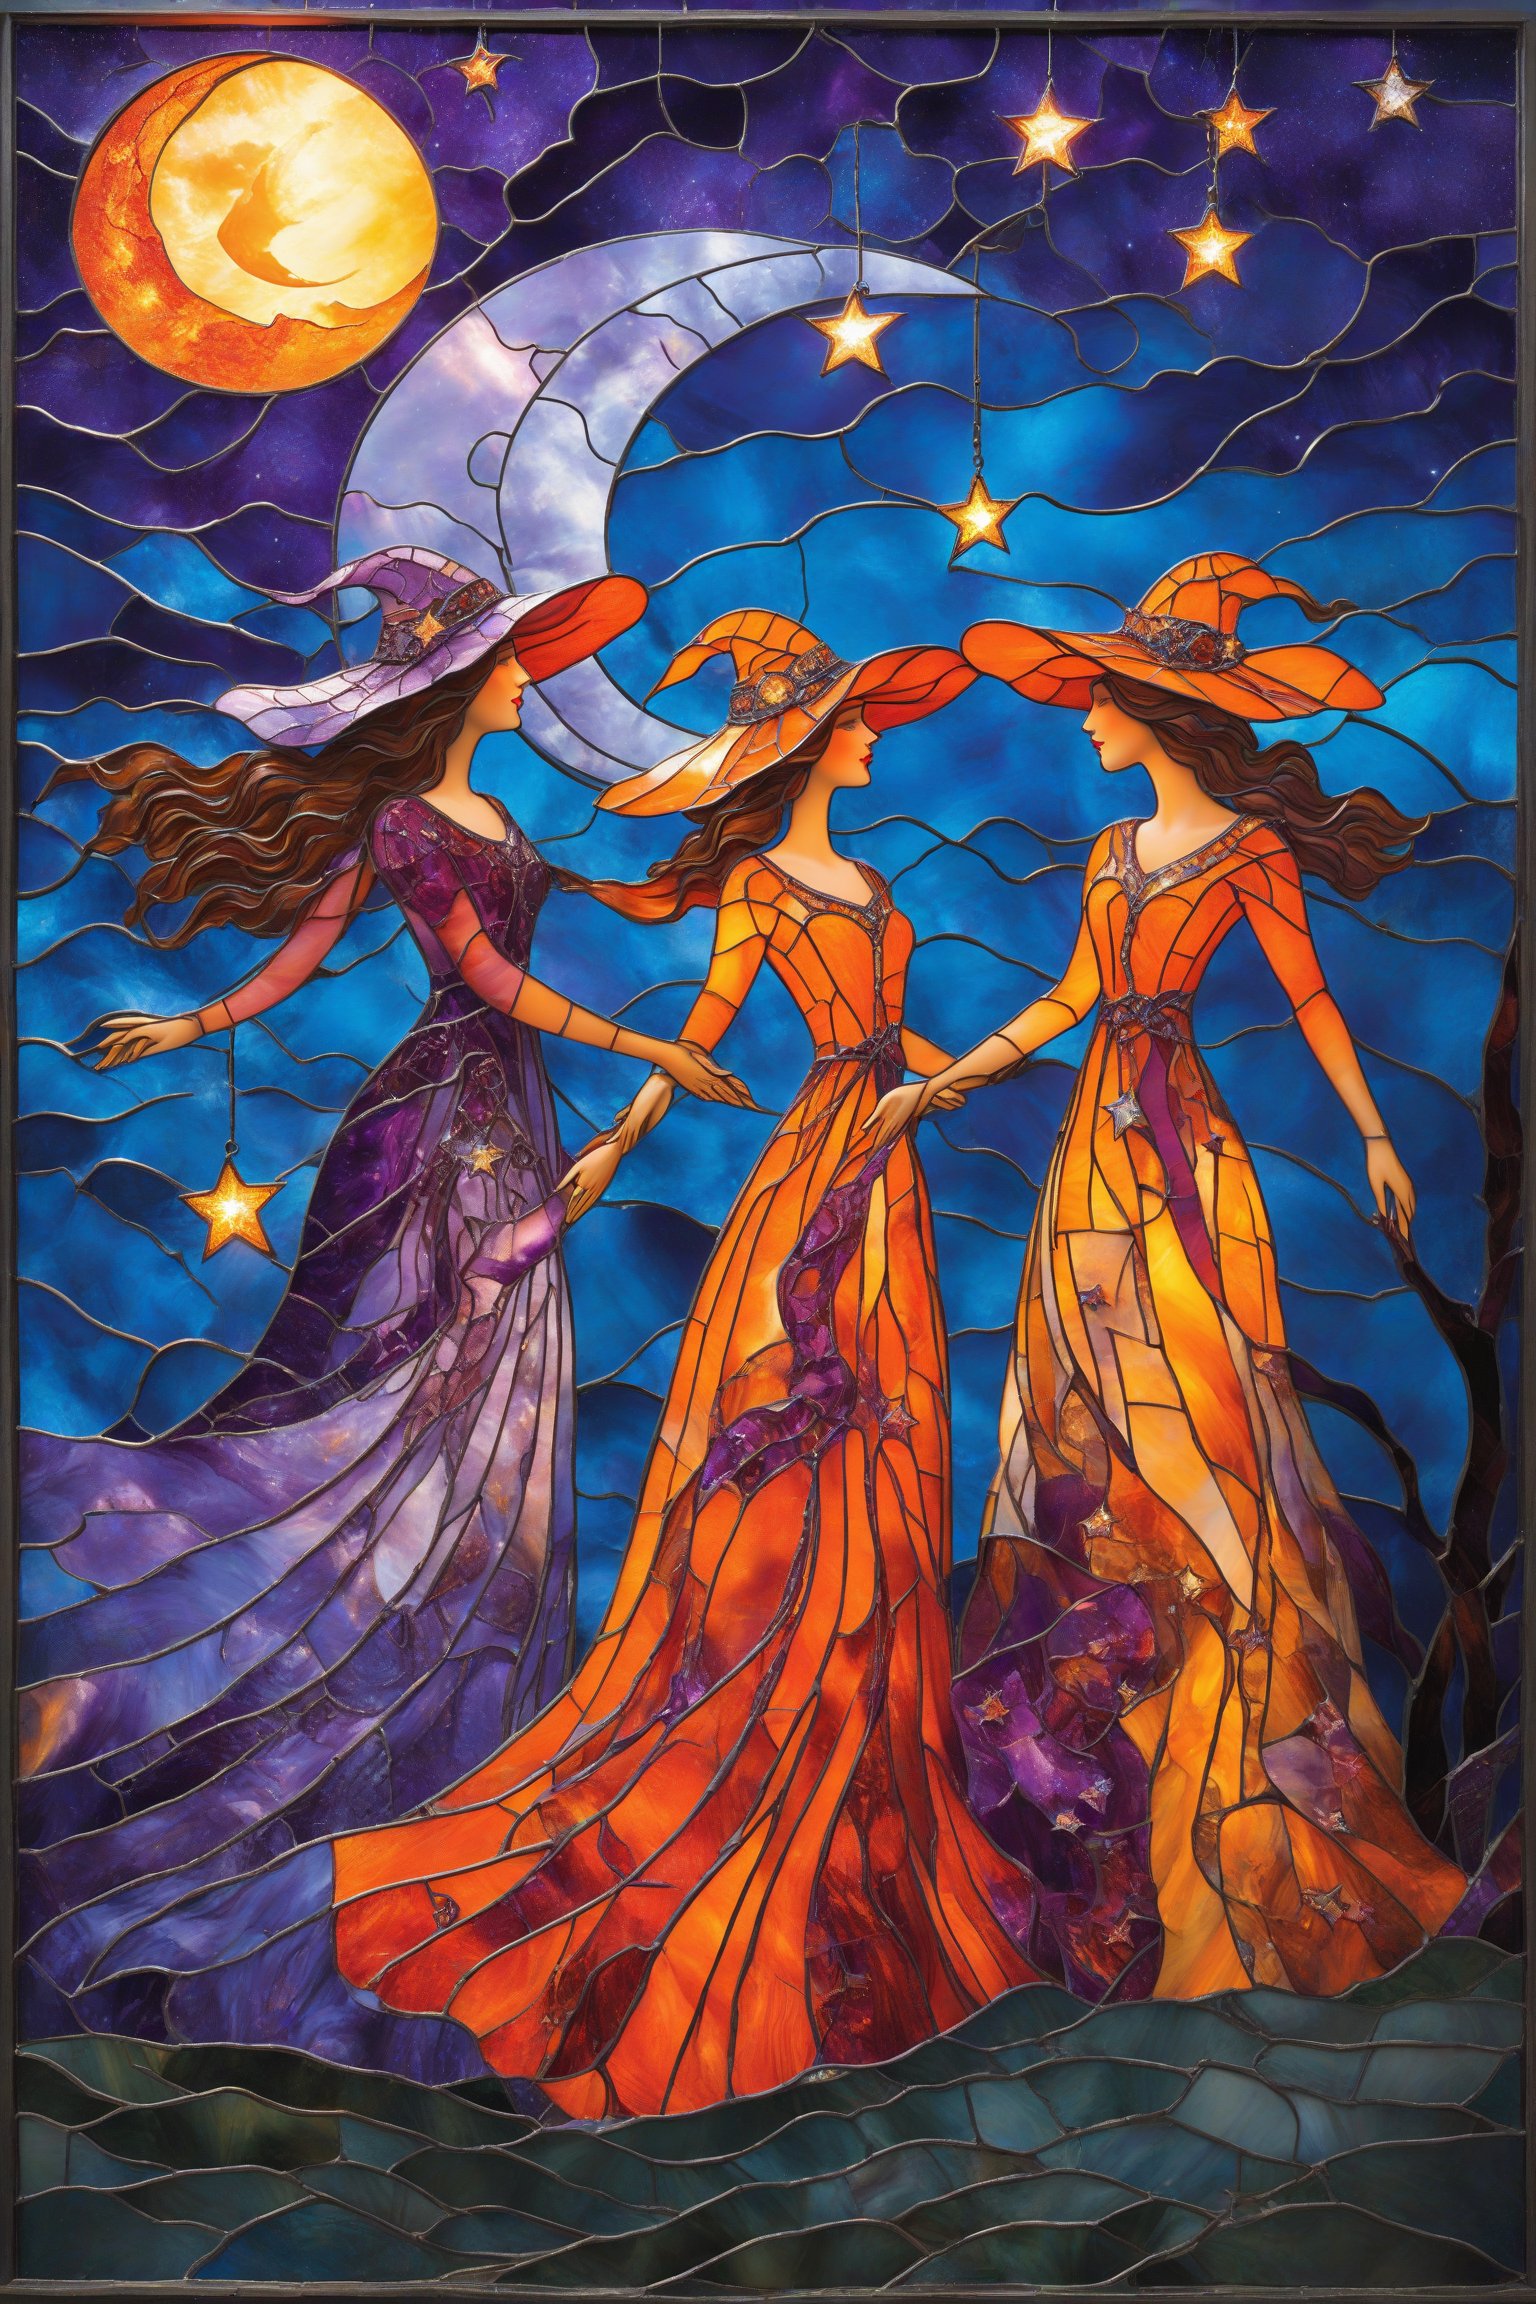 A stunning stained-glass artwork. It features three ethereal women, each adorned with a unique hat and flowing dress, set against a vibrant backdrop of a moonlit night. The women are positioned in a triangular formation, with the central figure facing the viewer. The leftmost woman wears a hat resembling a crescent moon and a dress in shades of orange and blue. The middle woman dons a hat with a star and a dress in shades of blue and purple. The rightmost woman sports a hat with a crescent moon and a dress in shades of purple and orange. The background is awash with hues of blue, orange, and yellow, depicting a night sky with floating orbs and silhouettes of trees. At the bottom, there are pumpkins, suggesting a Halloween theme.